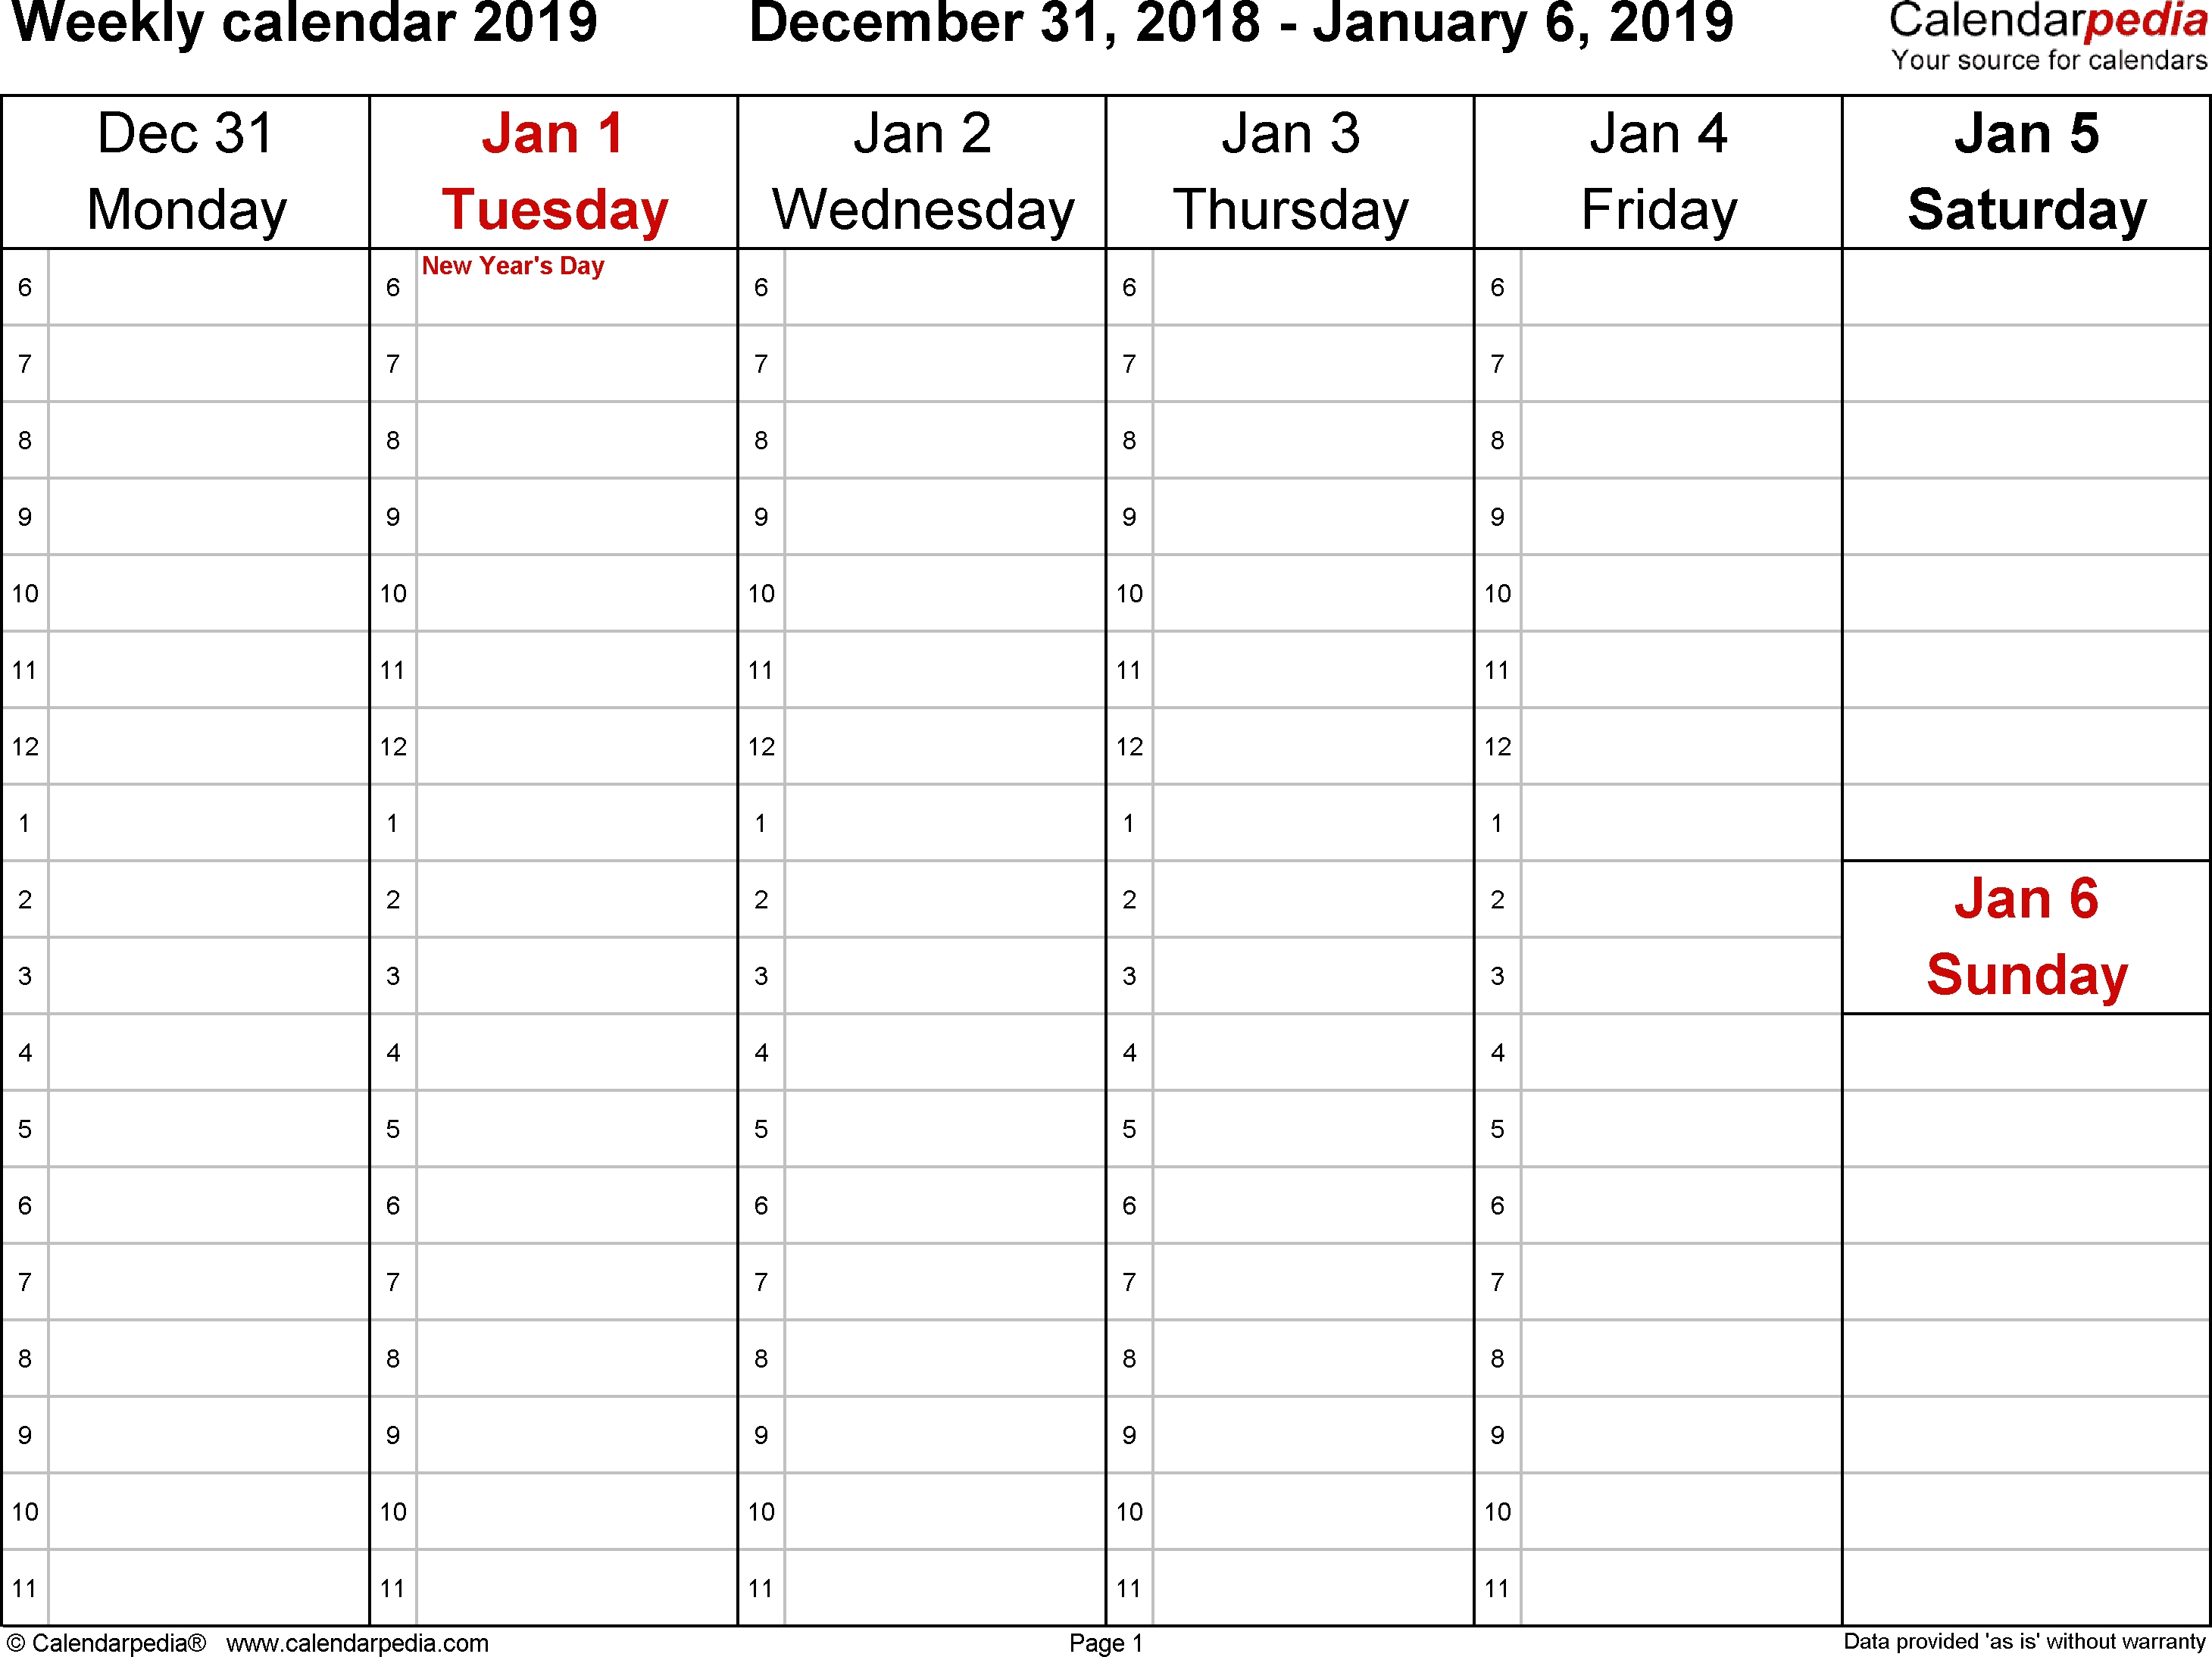 Weekly Calendars 2019 For Word - 12 Free Printable Templates Perky Calendar Showing Monday Through Friday